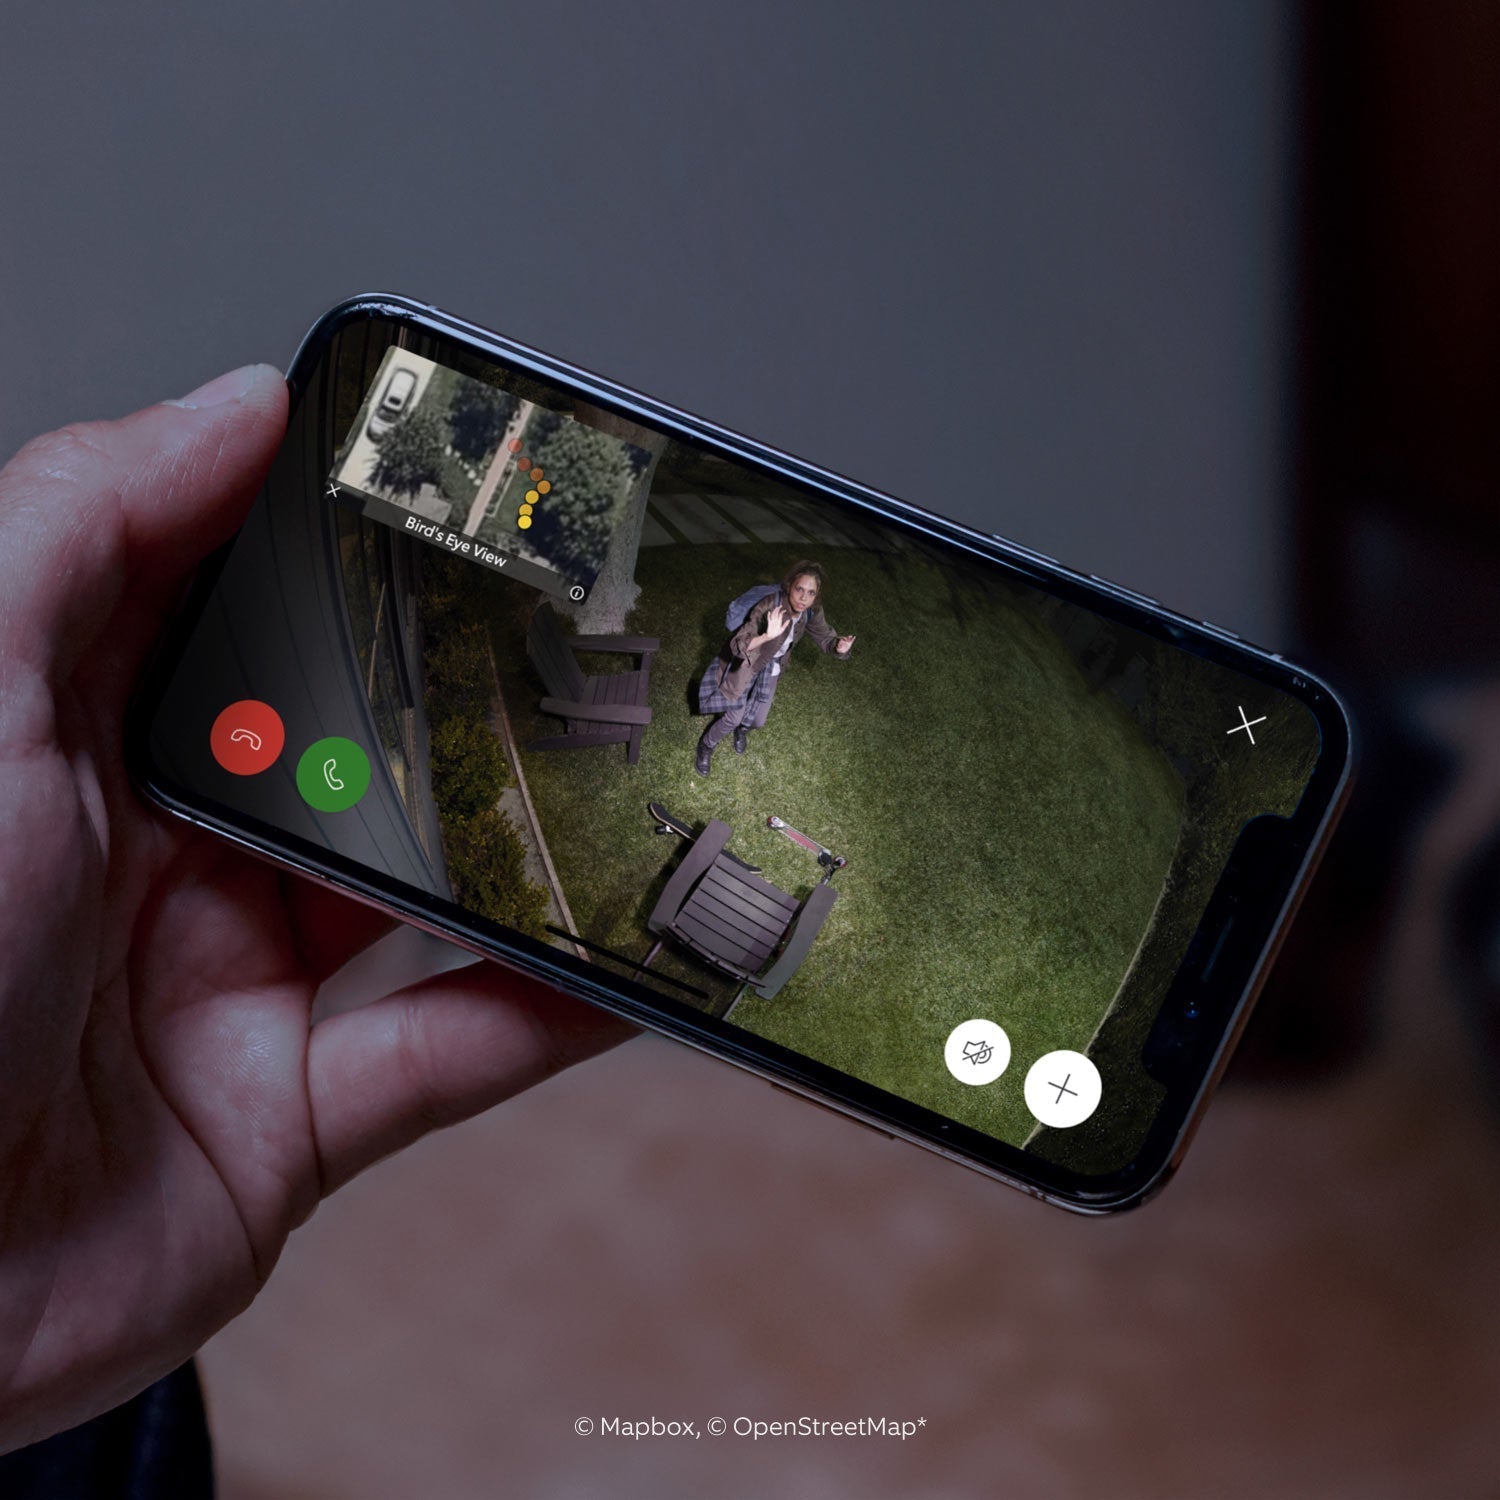 Spotlight Cam Pro (Wired) - Close-up of smartphone showing video of a person in a yard, looking up into Spotlight Cam Pro camera. Inset is bird's eye view perspective.